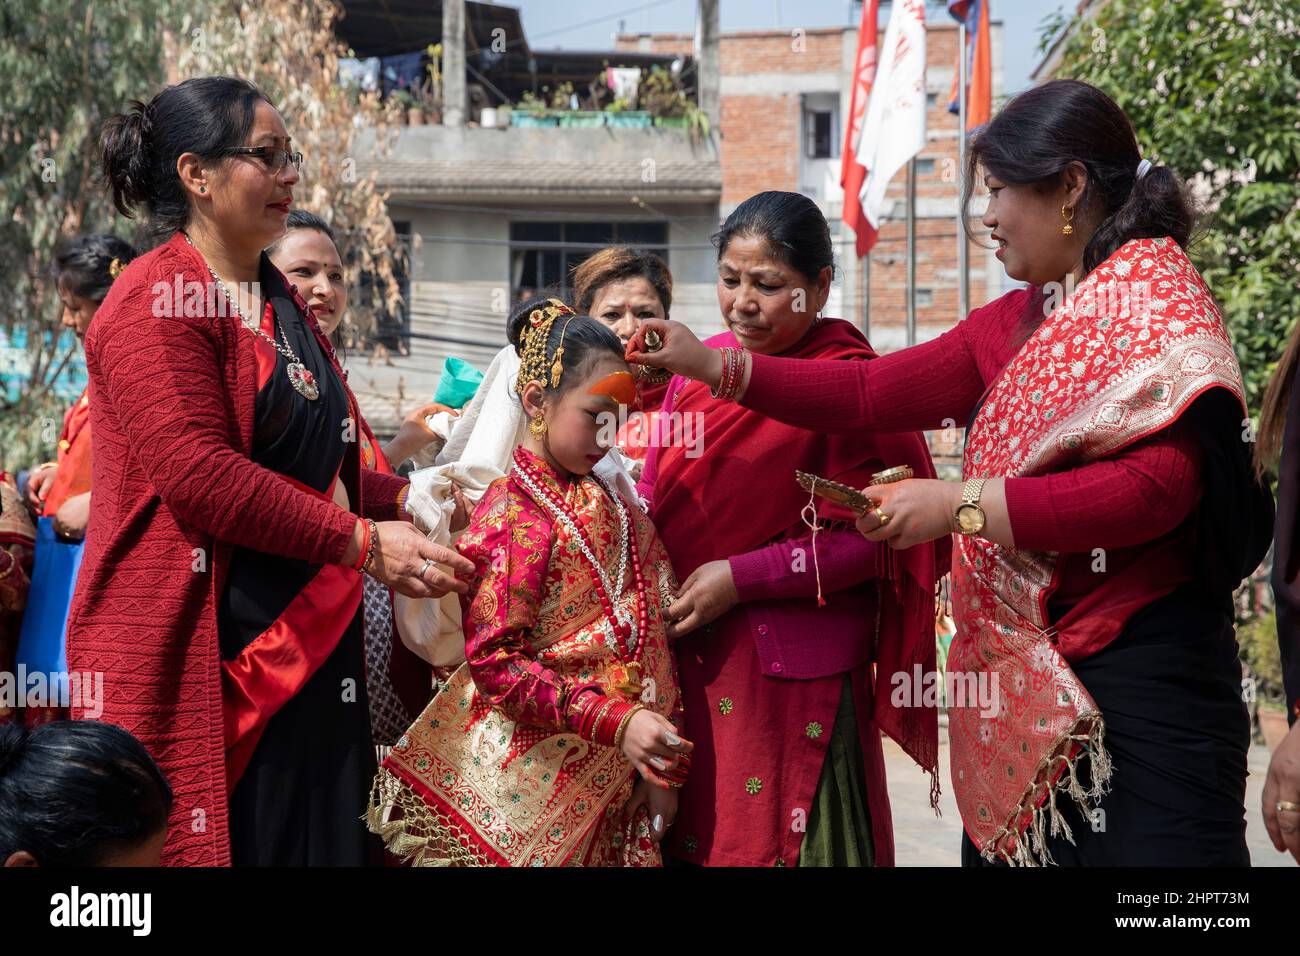 Lalitpur, Nepal. 23rd Feb, 2022. A girl participates in a puberty ceremony known as Gufa in Lalitpur, Nepal, Feb. 23, 2022. Credit: Hari Maharjan/Xinhua/Alamy Live News Stock Photo